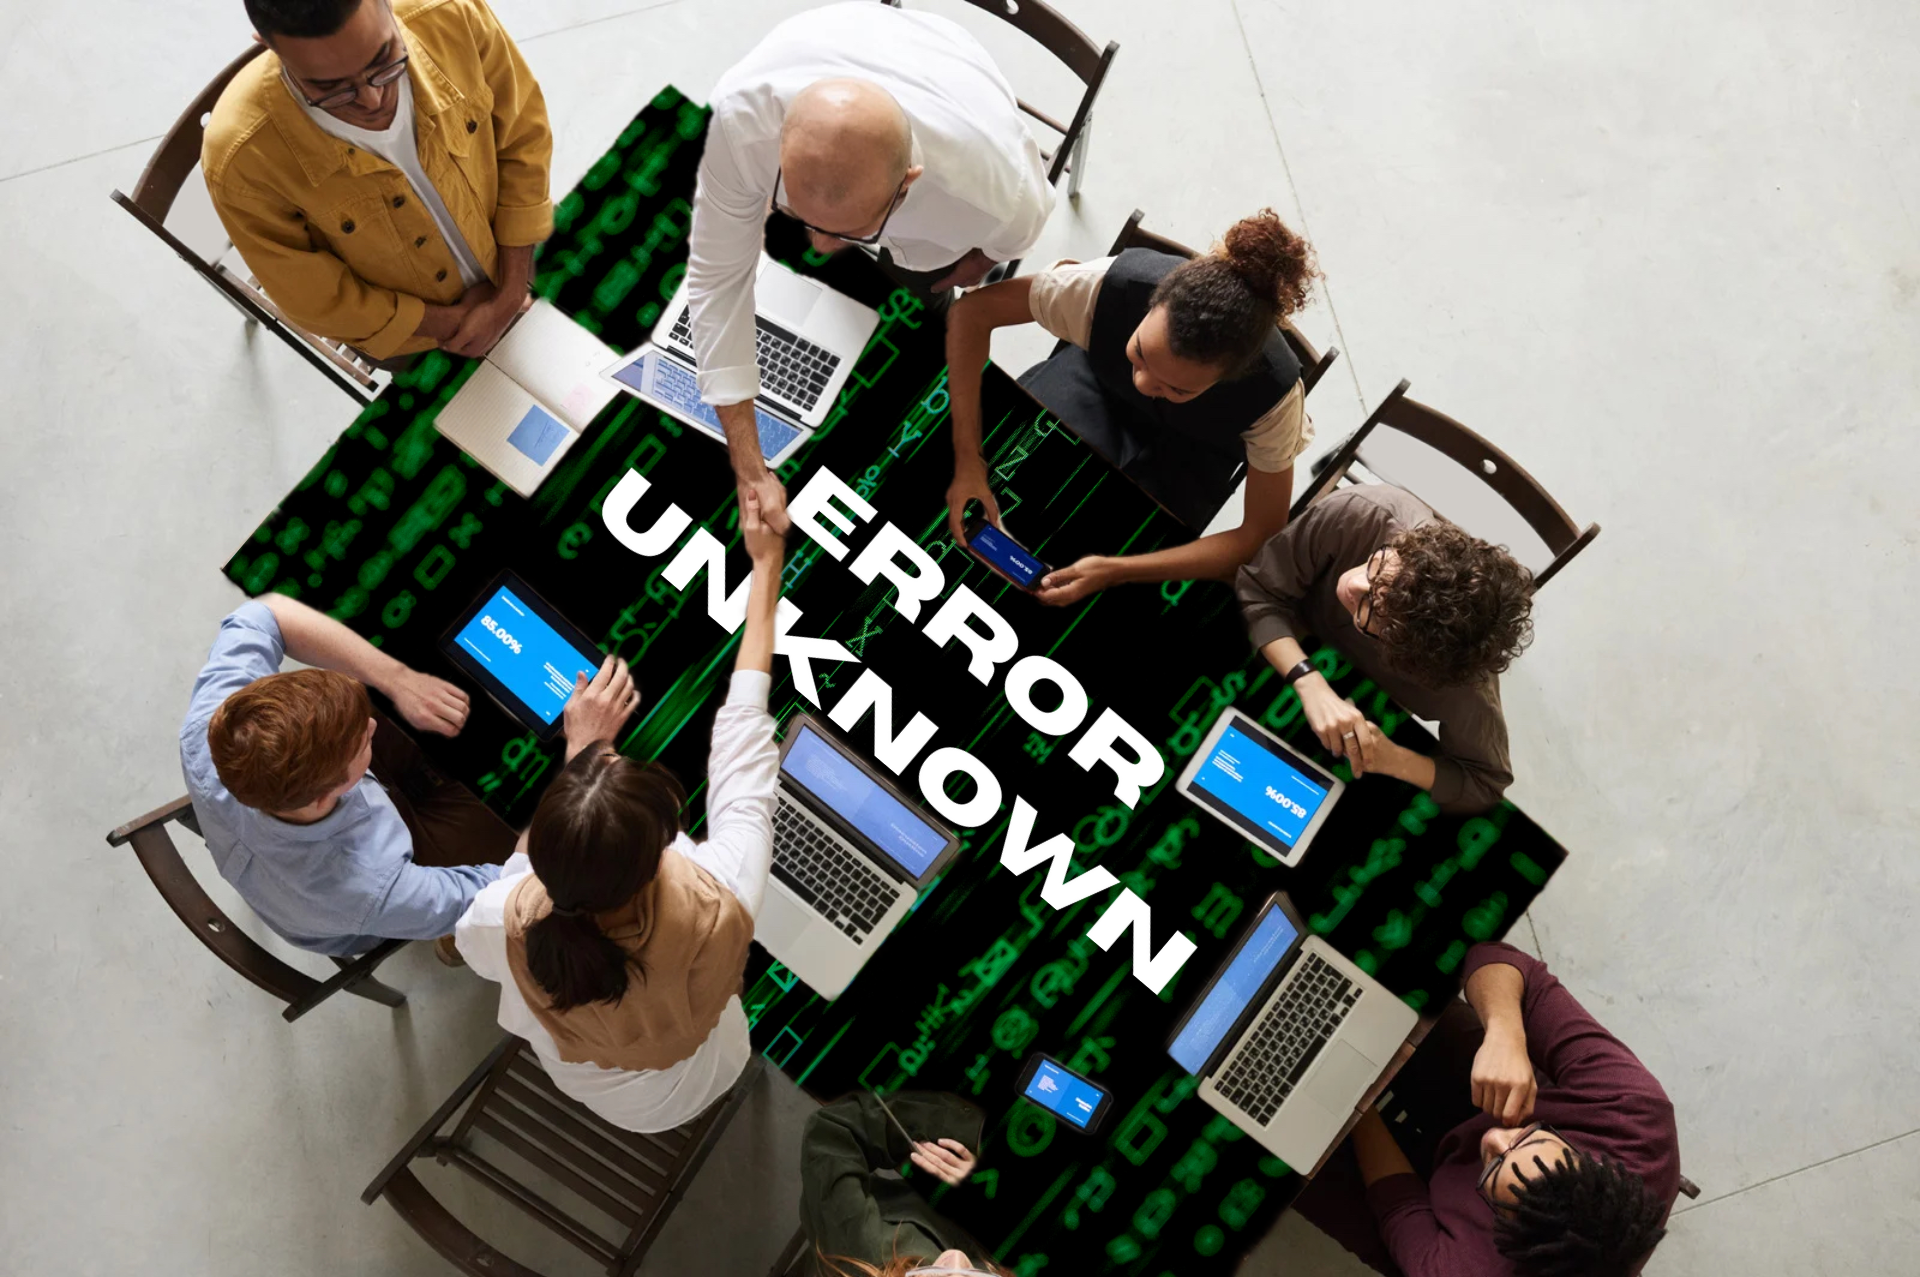 business people conducting a meeting around a table - table has green matrix code in back with white text "Error Unknown" superimposed